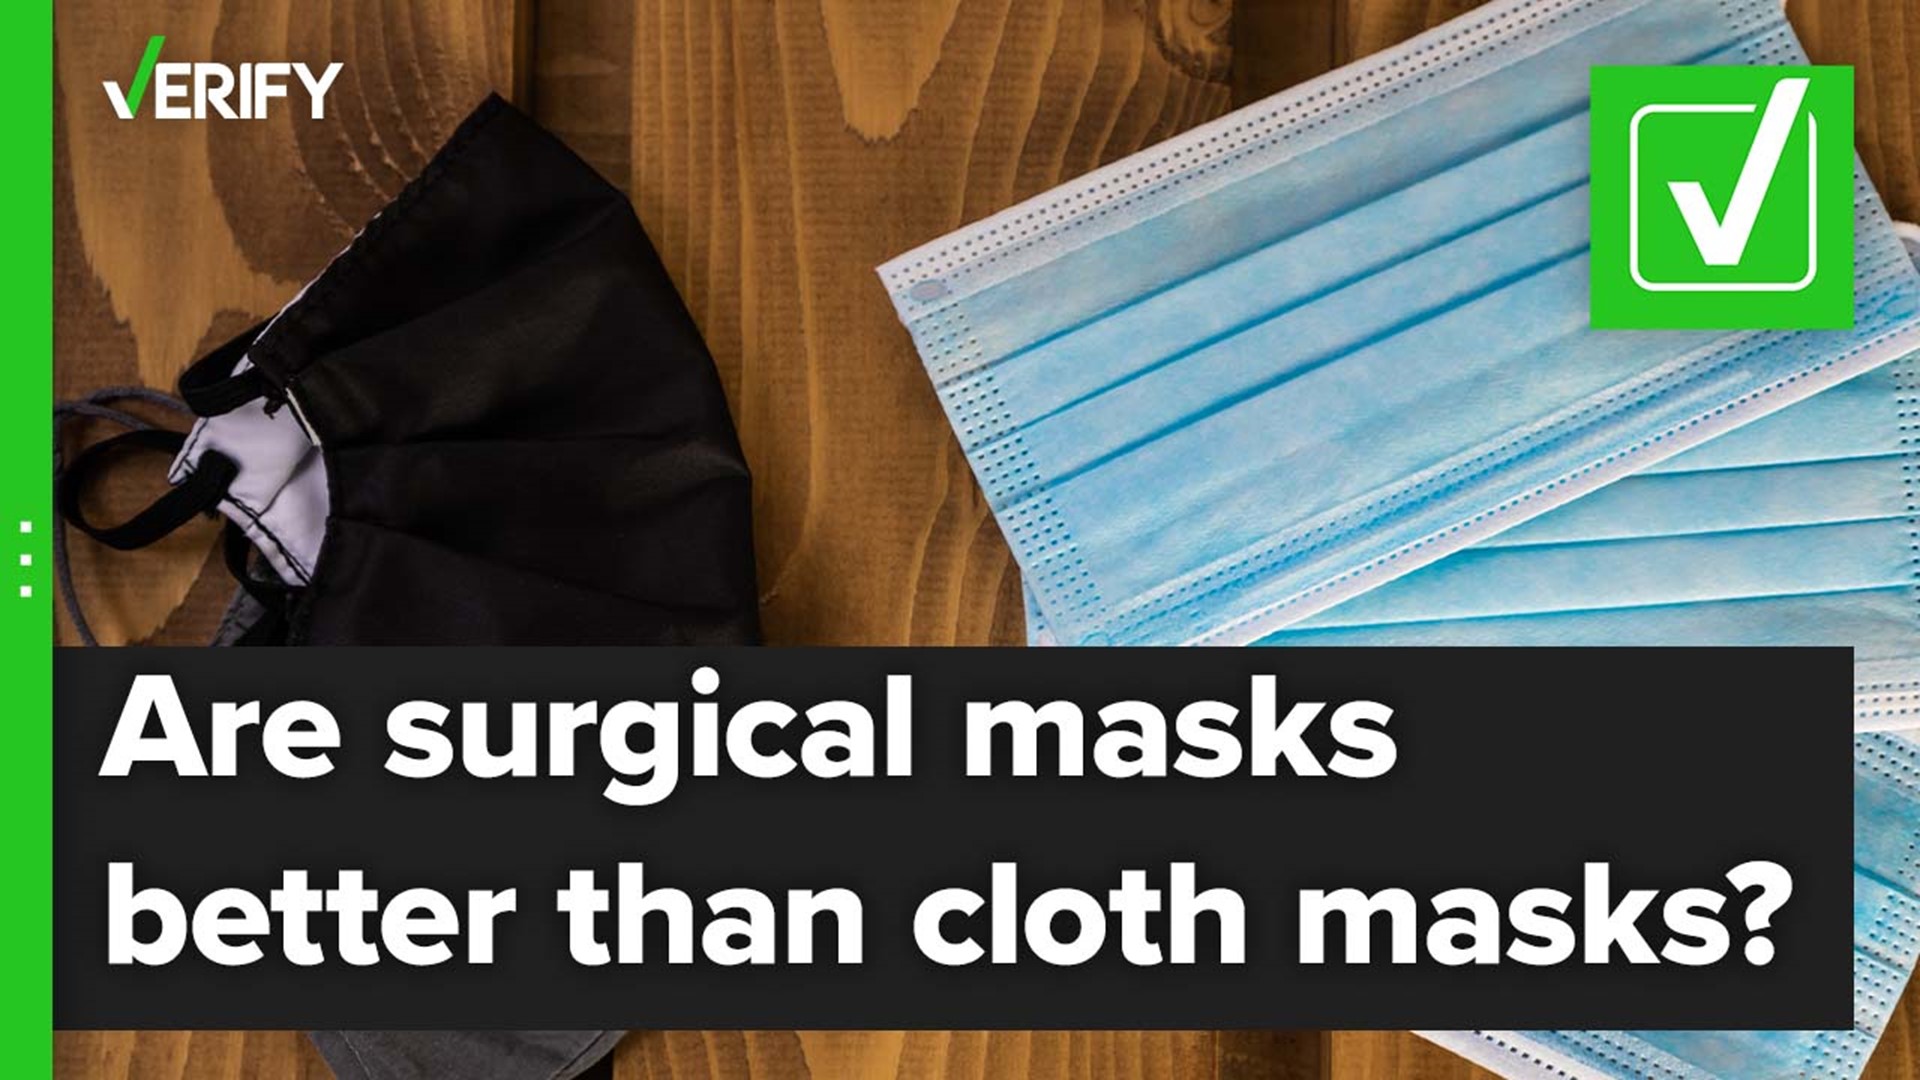 Multiple studies have found that surgical masks offer better protection against airborne particles than cloth masks.